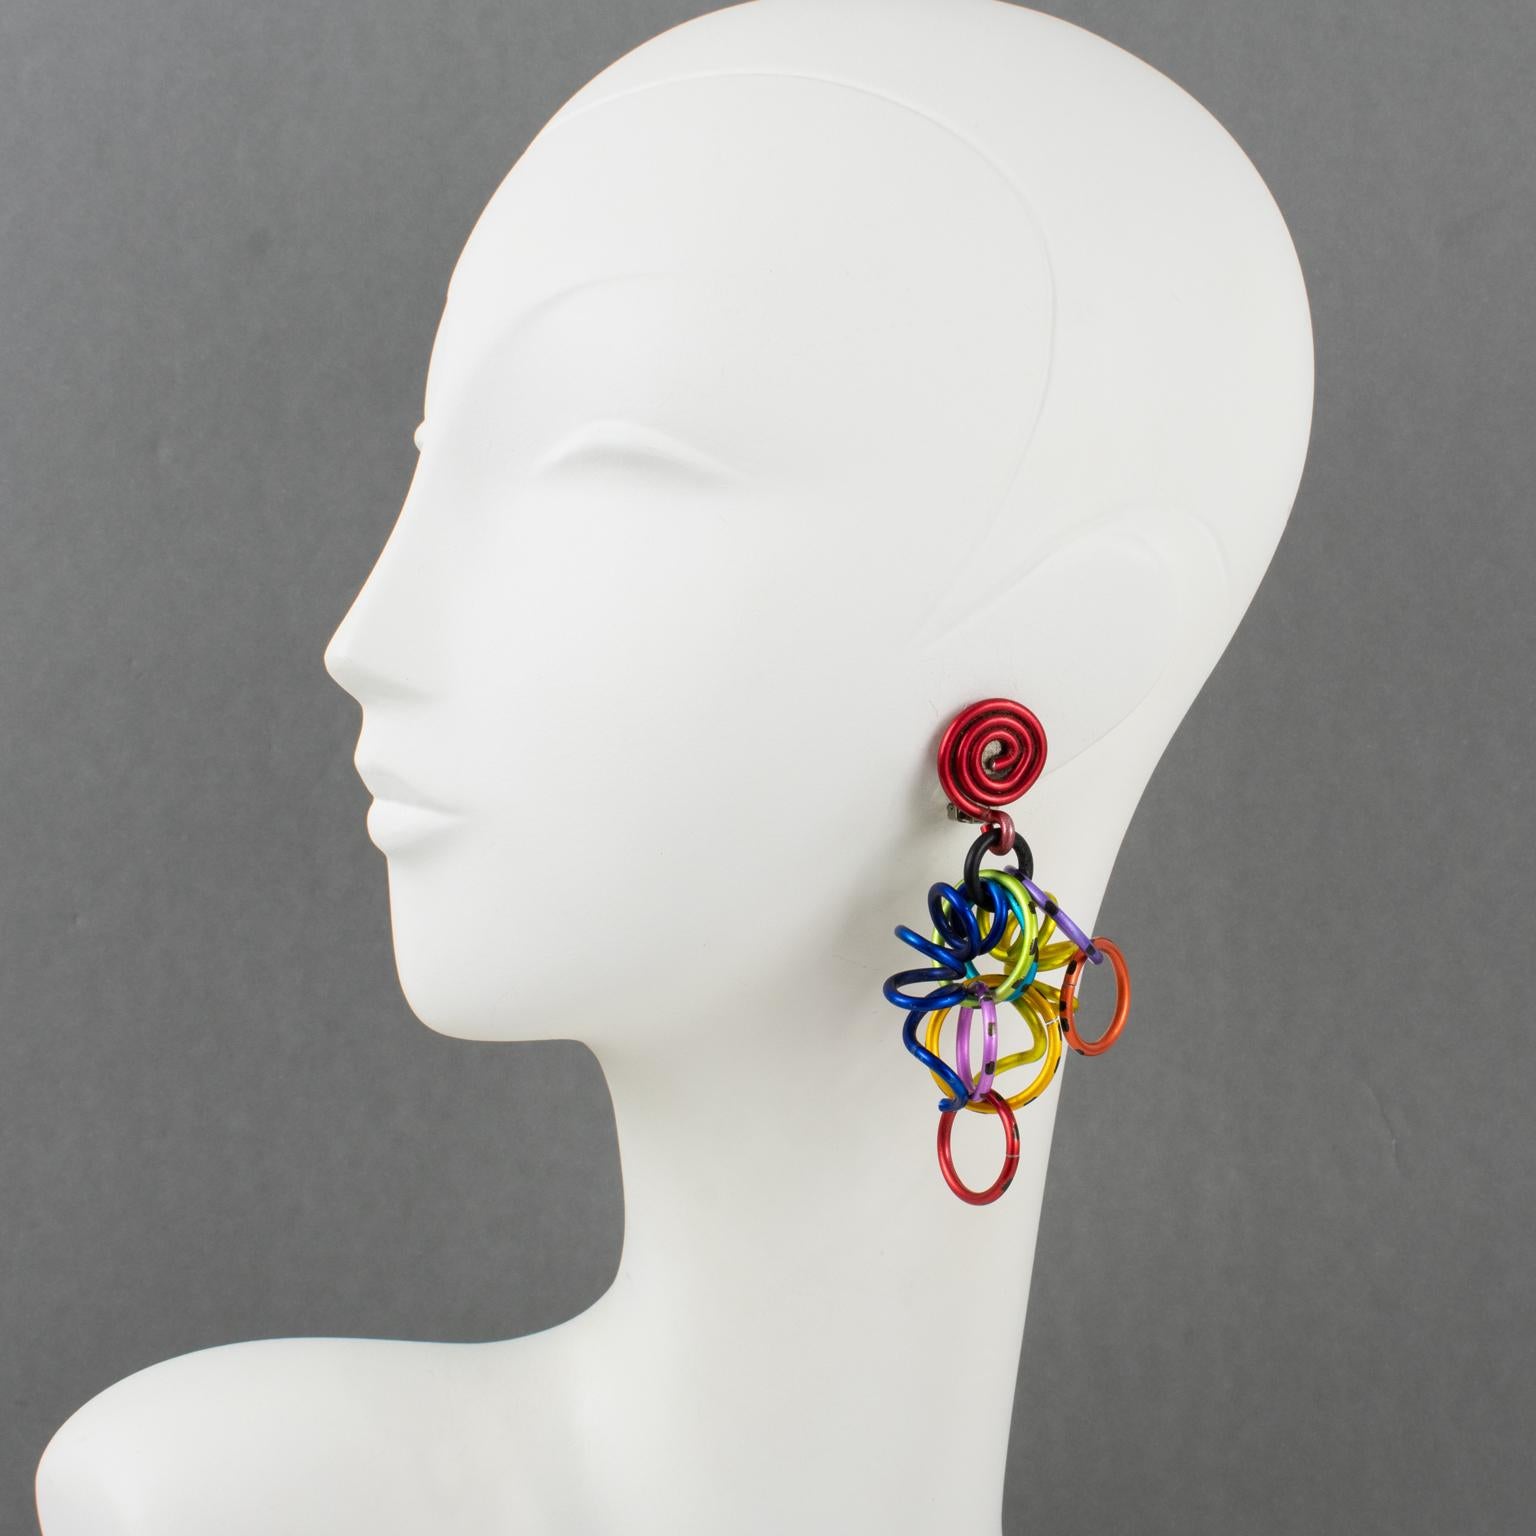 These incredible David Spada, New York signed dangling clip-on earrings feature a groovy Space Age 1980s design with dangle articulated spirally coiled elements with assorted size rings. They are made of anodized aluminum metal with bright rainbow